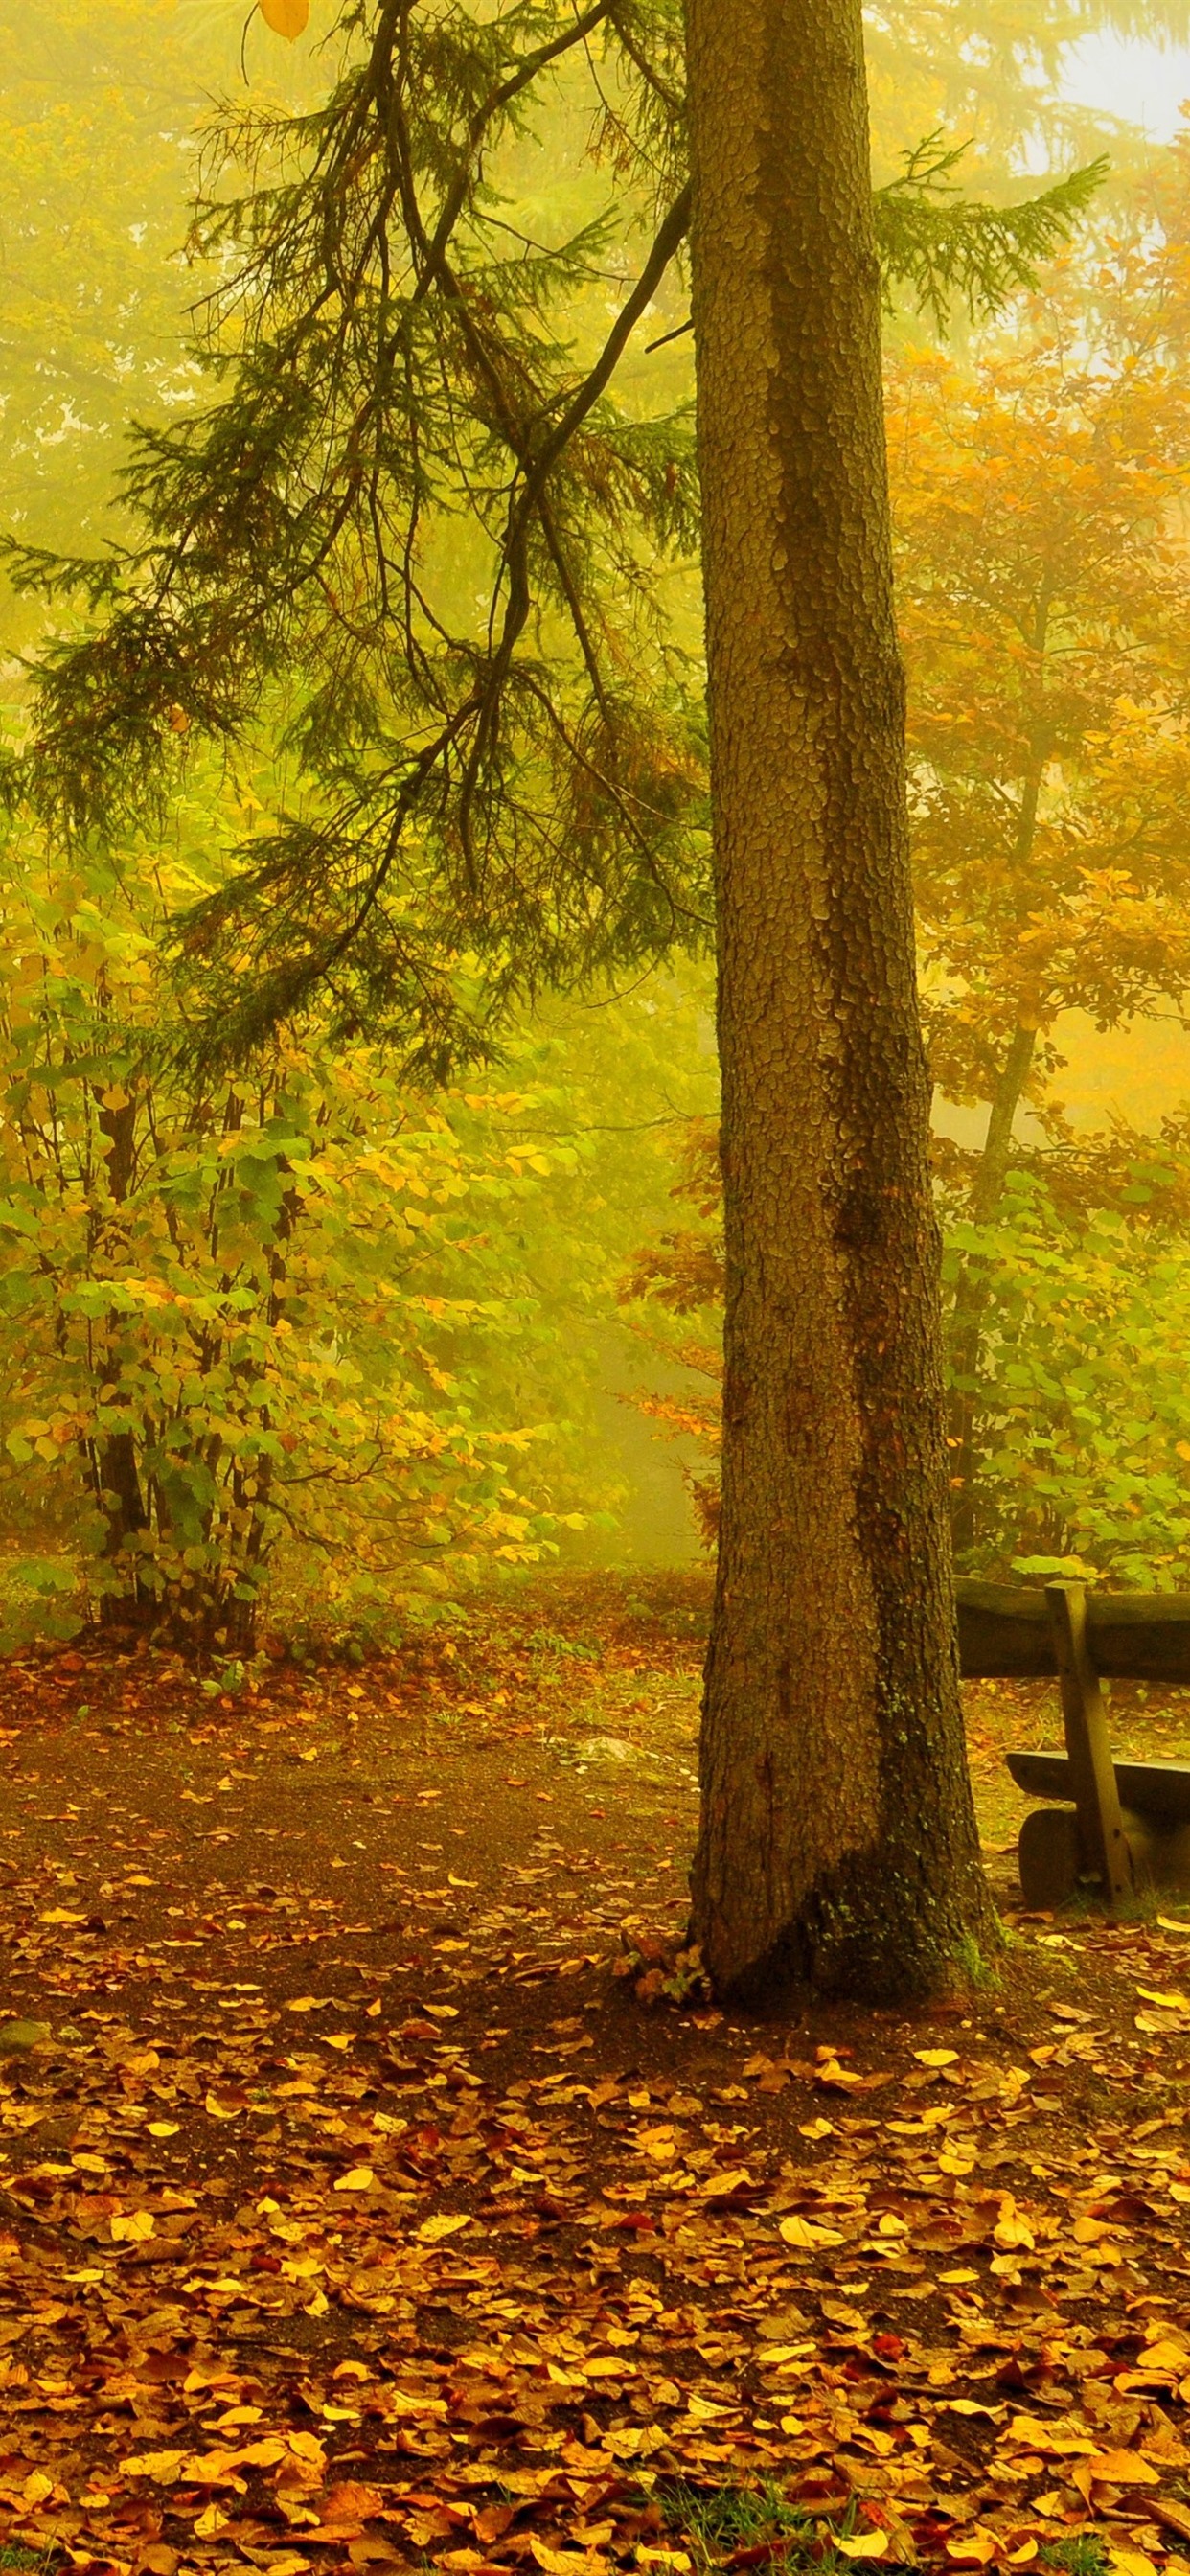 Autumn, Trees, Fog, Bench, Nature Scenery 1242x2688 IPhone 11 Pro XS Max Wallpaper, Background, Picture, Image